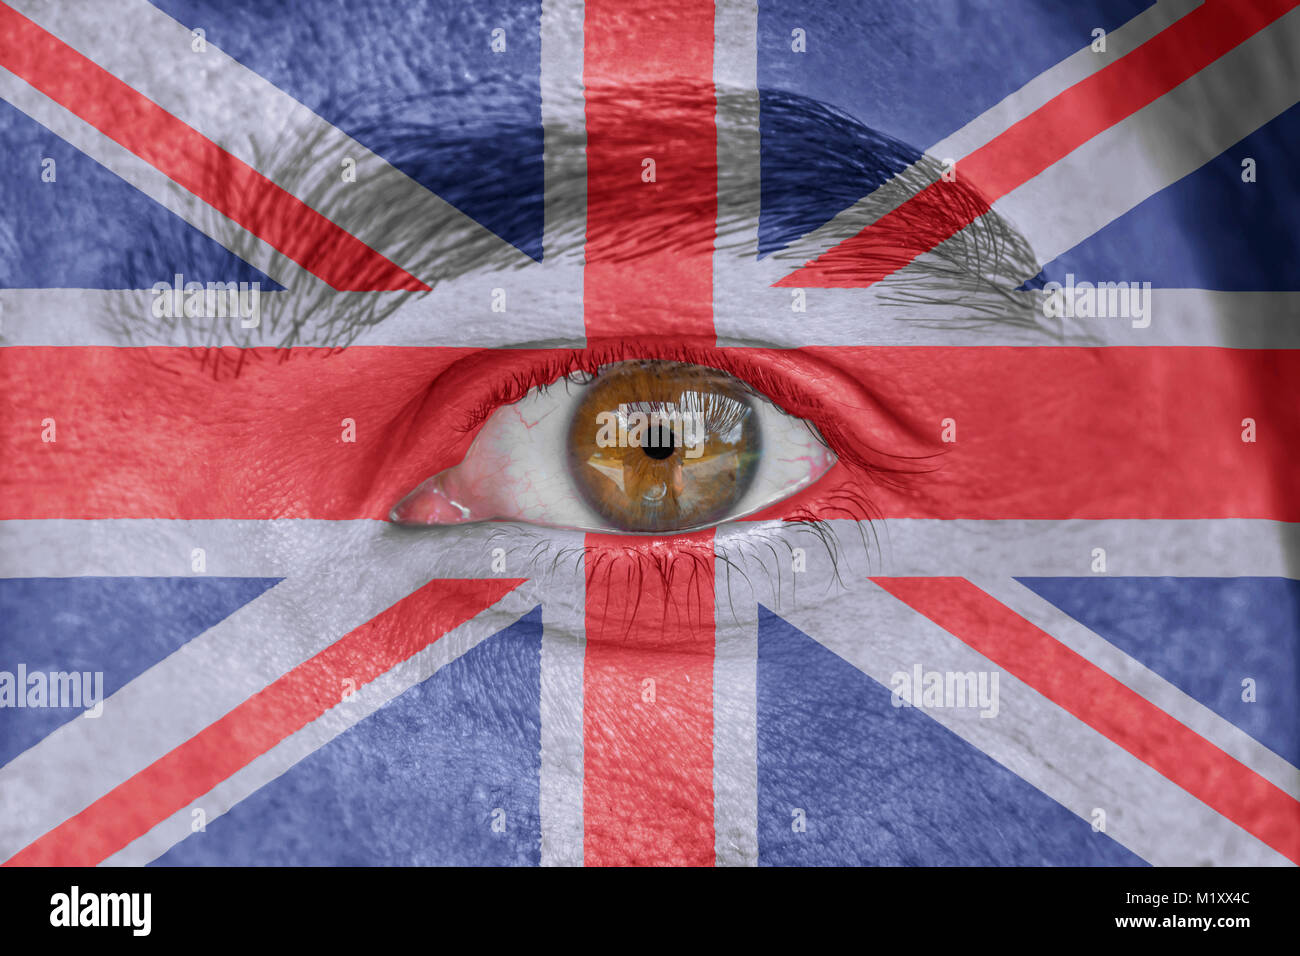 Human face and eye painted with flag of United Kingdom Stock Photo